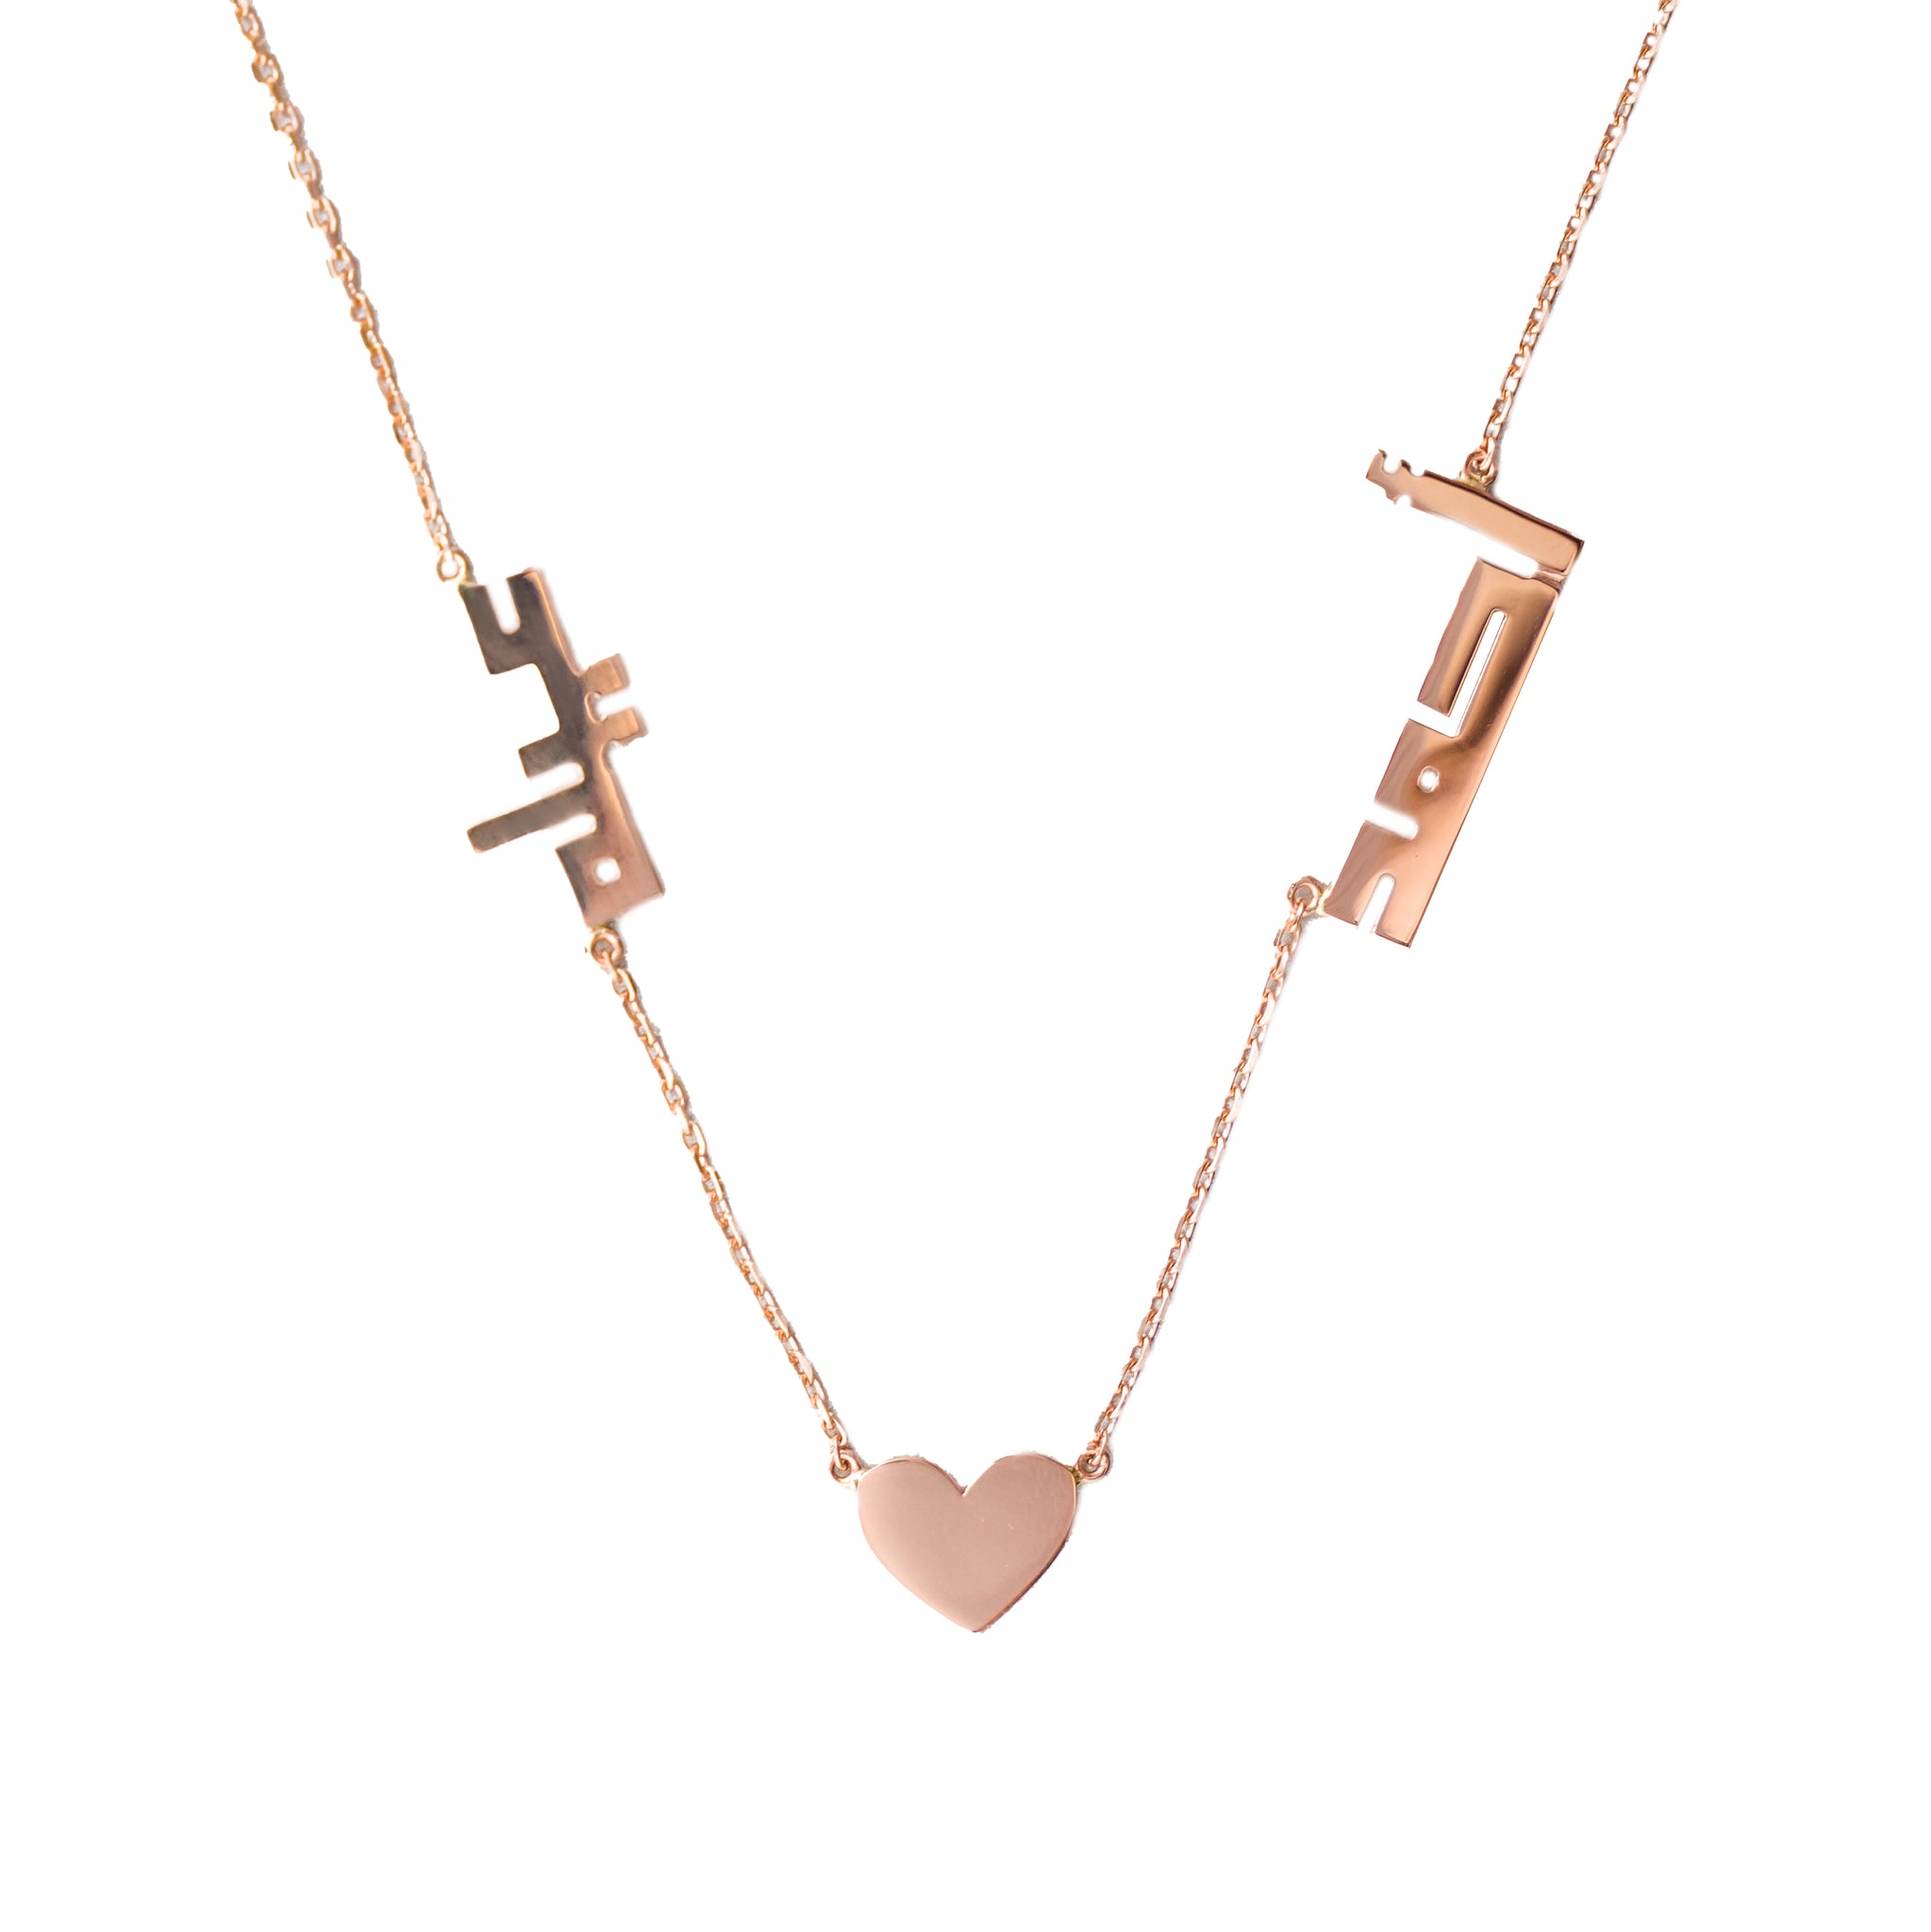 Two Names with Gold Heart in between Necklace